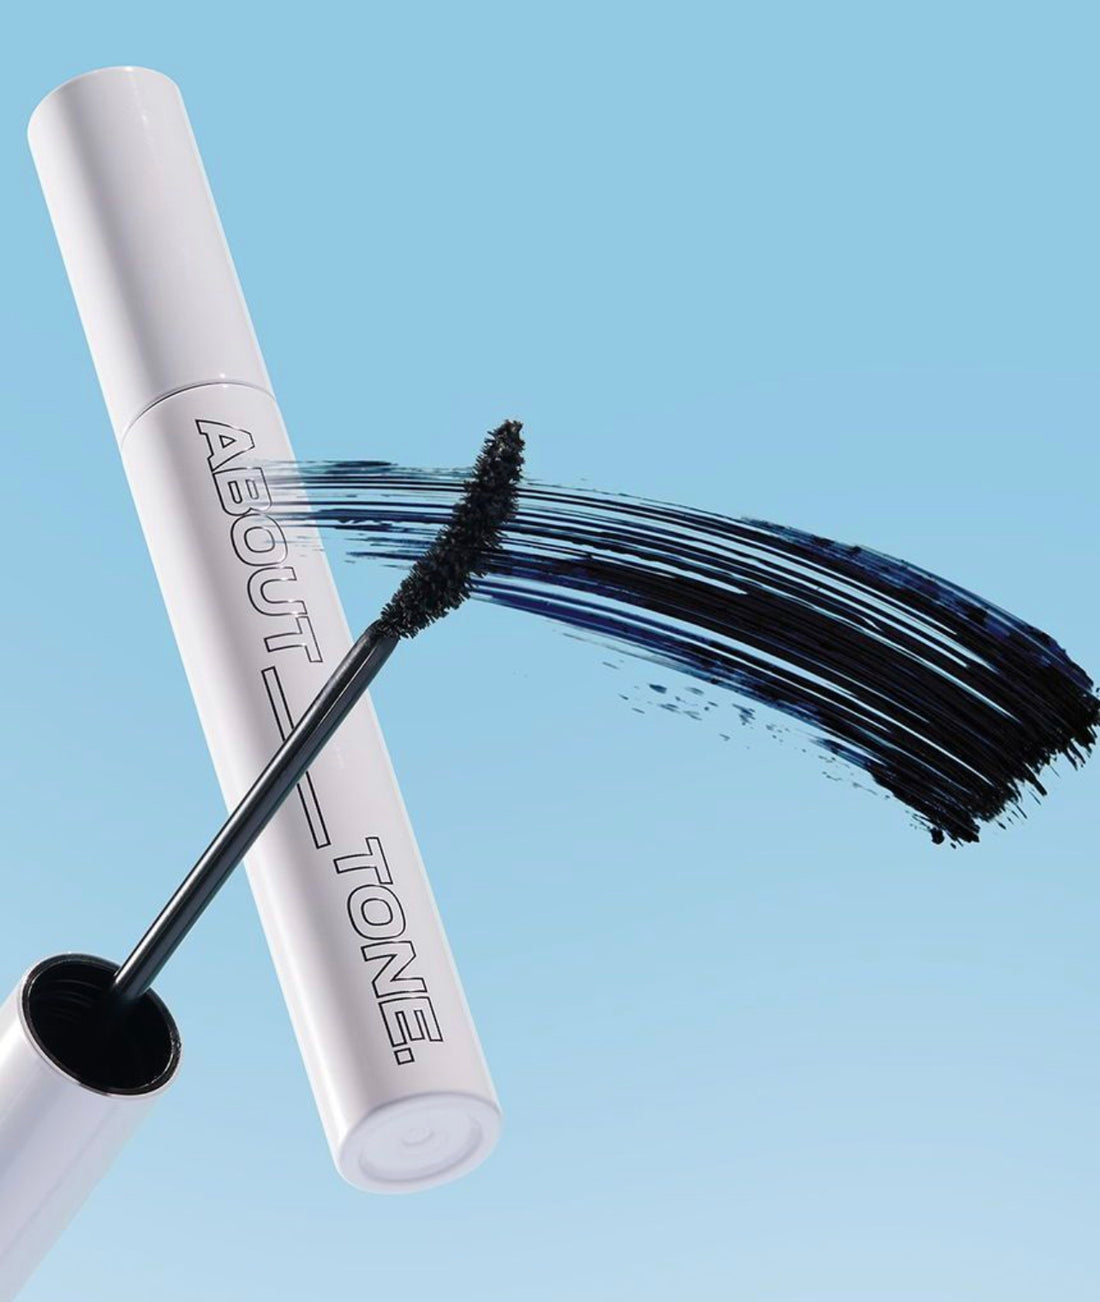 (EXPIRY: 08/2024) About Tone Hi High Long And Curl Mascara (2 Shades)